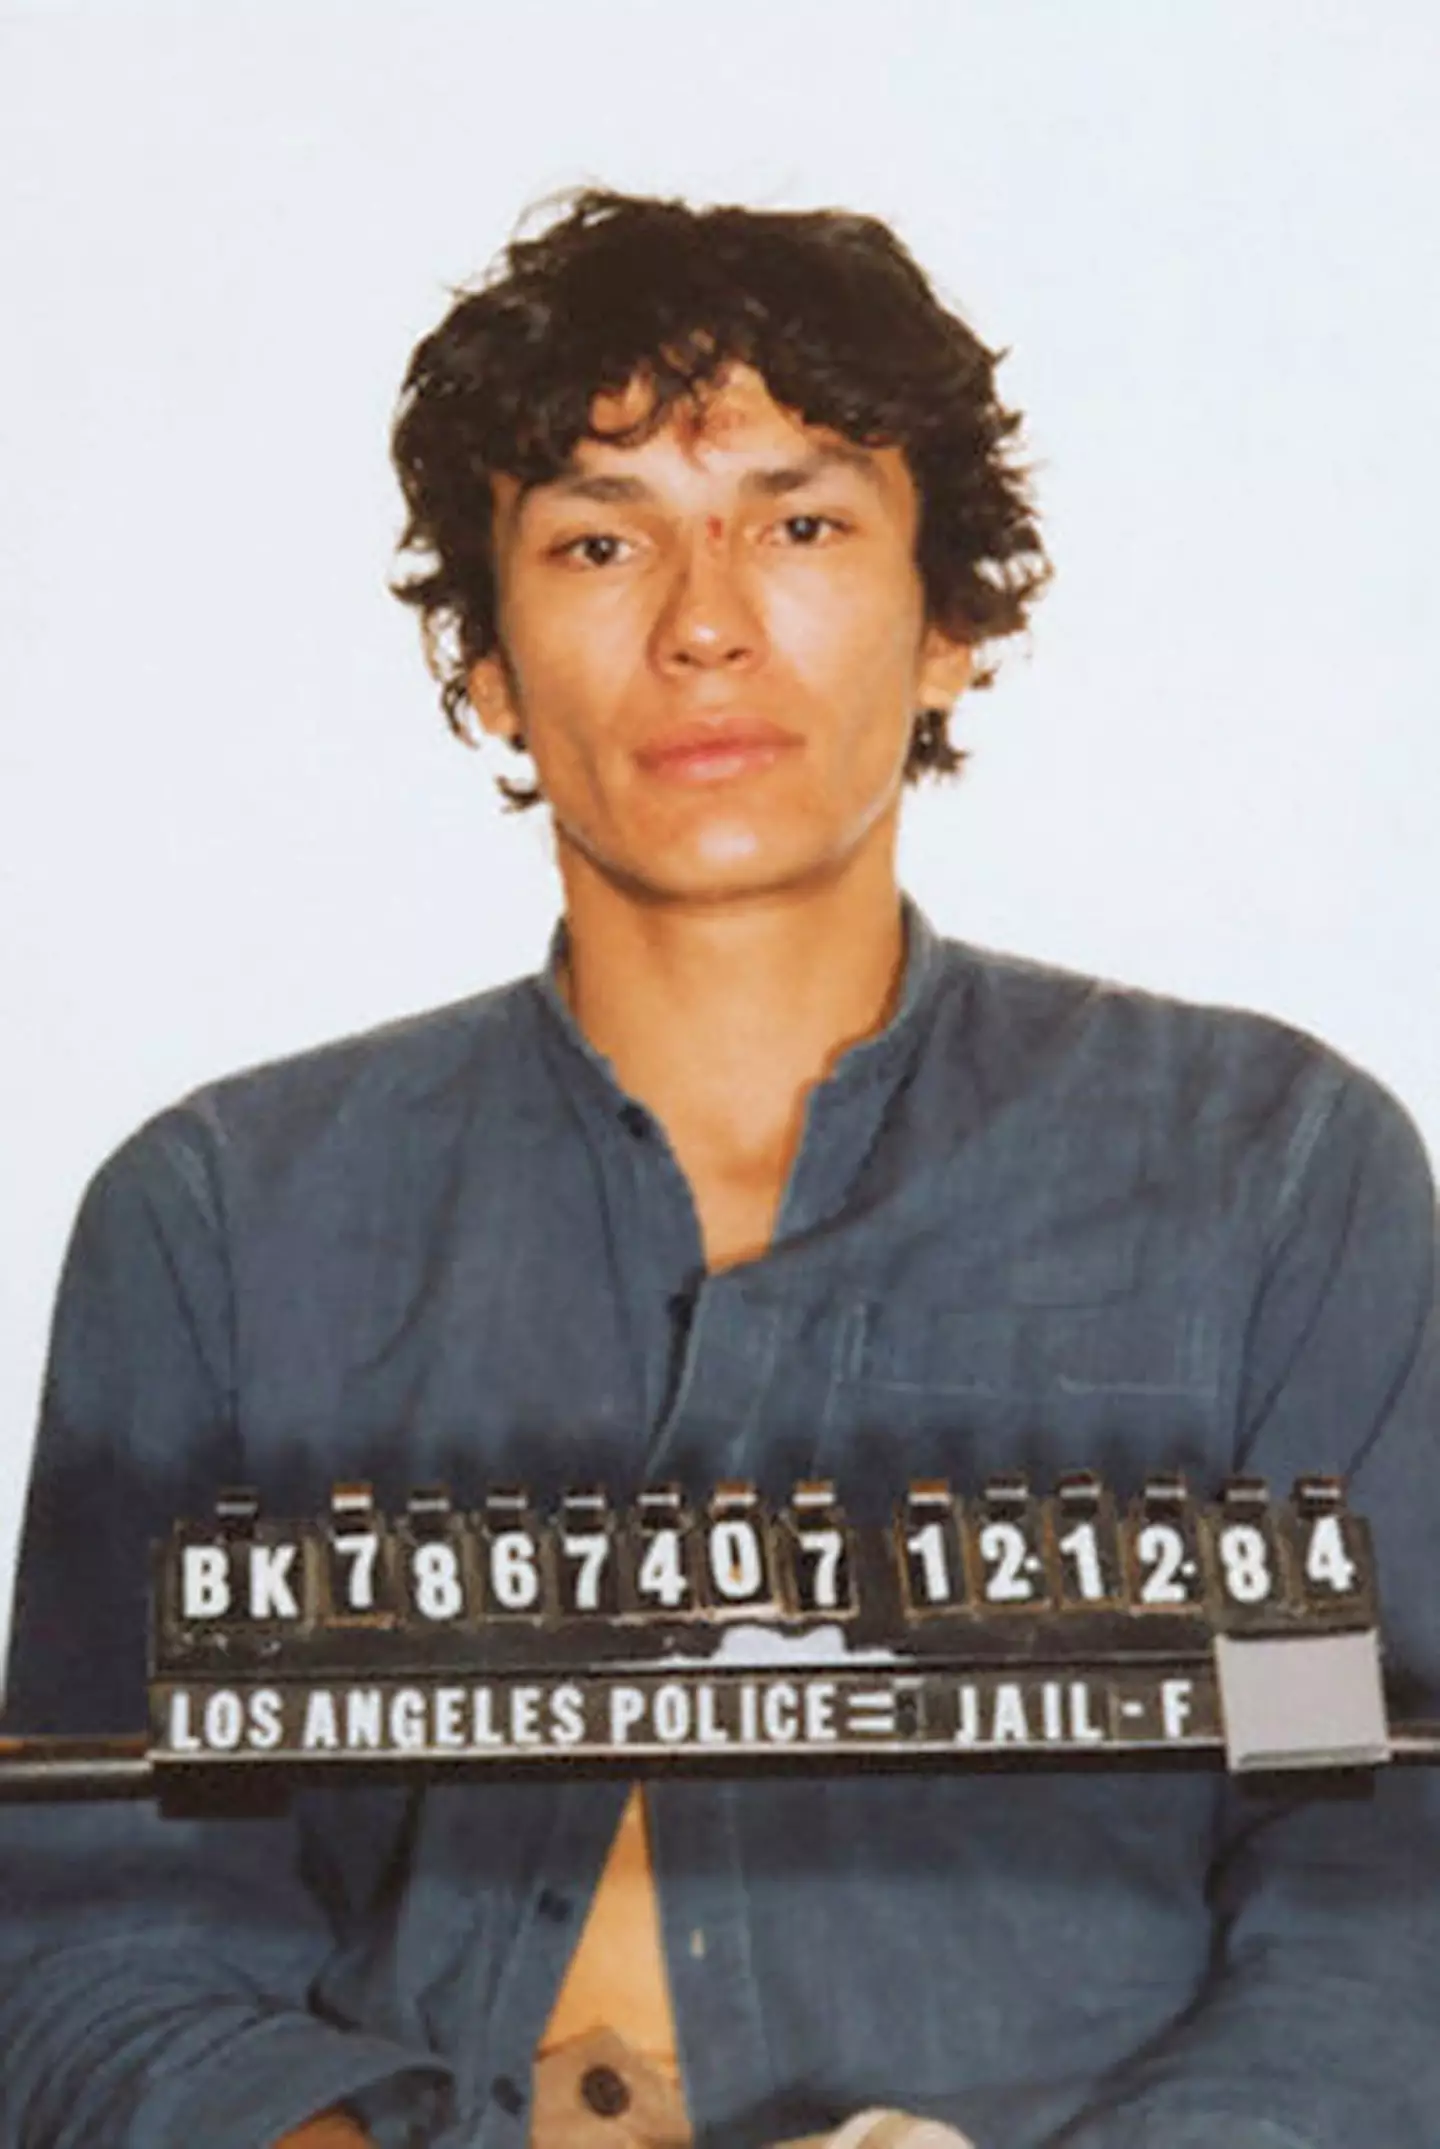 'The Night Stalker' Richard Ramirez is also a Pieces. (Michael Ochs Archives/Getty Images)